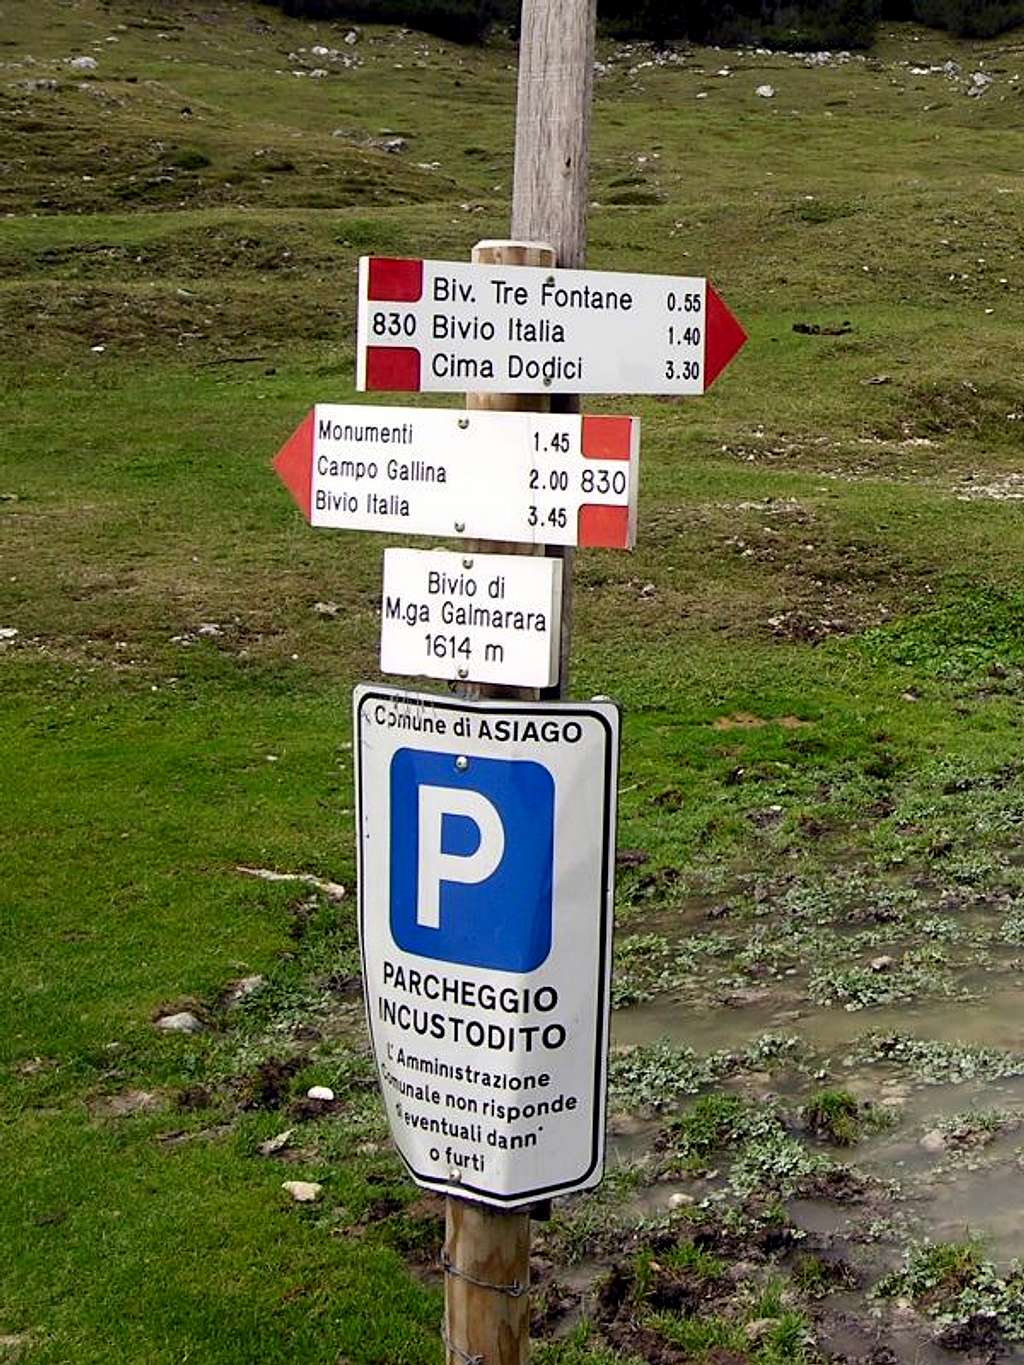 The parking place at m. 1,614